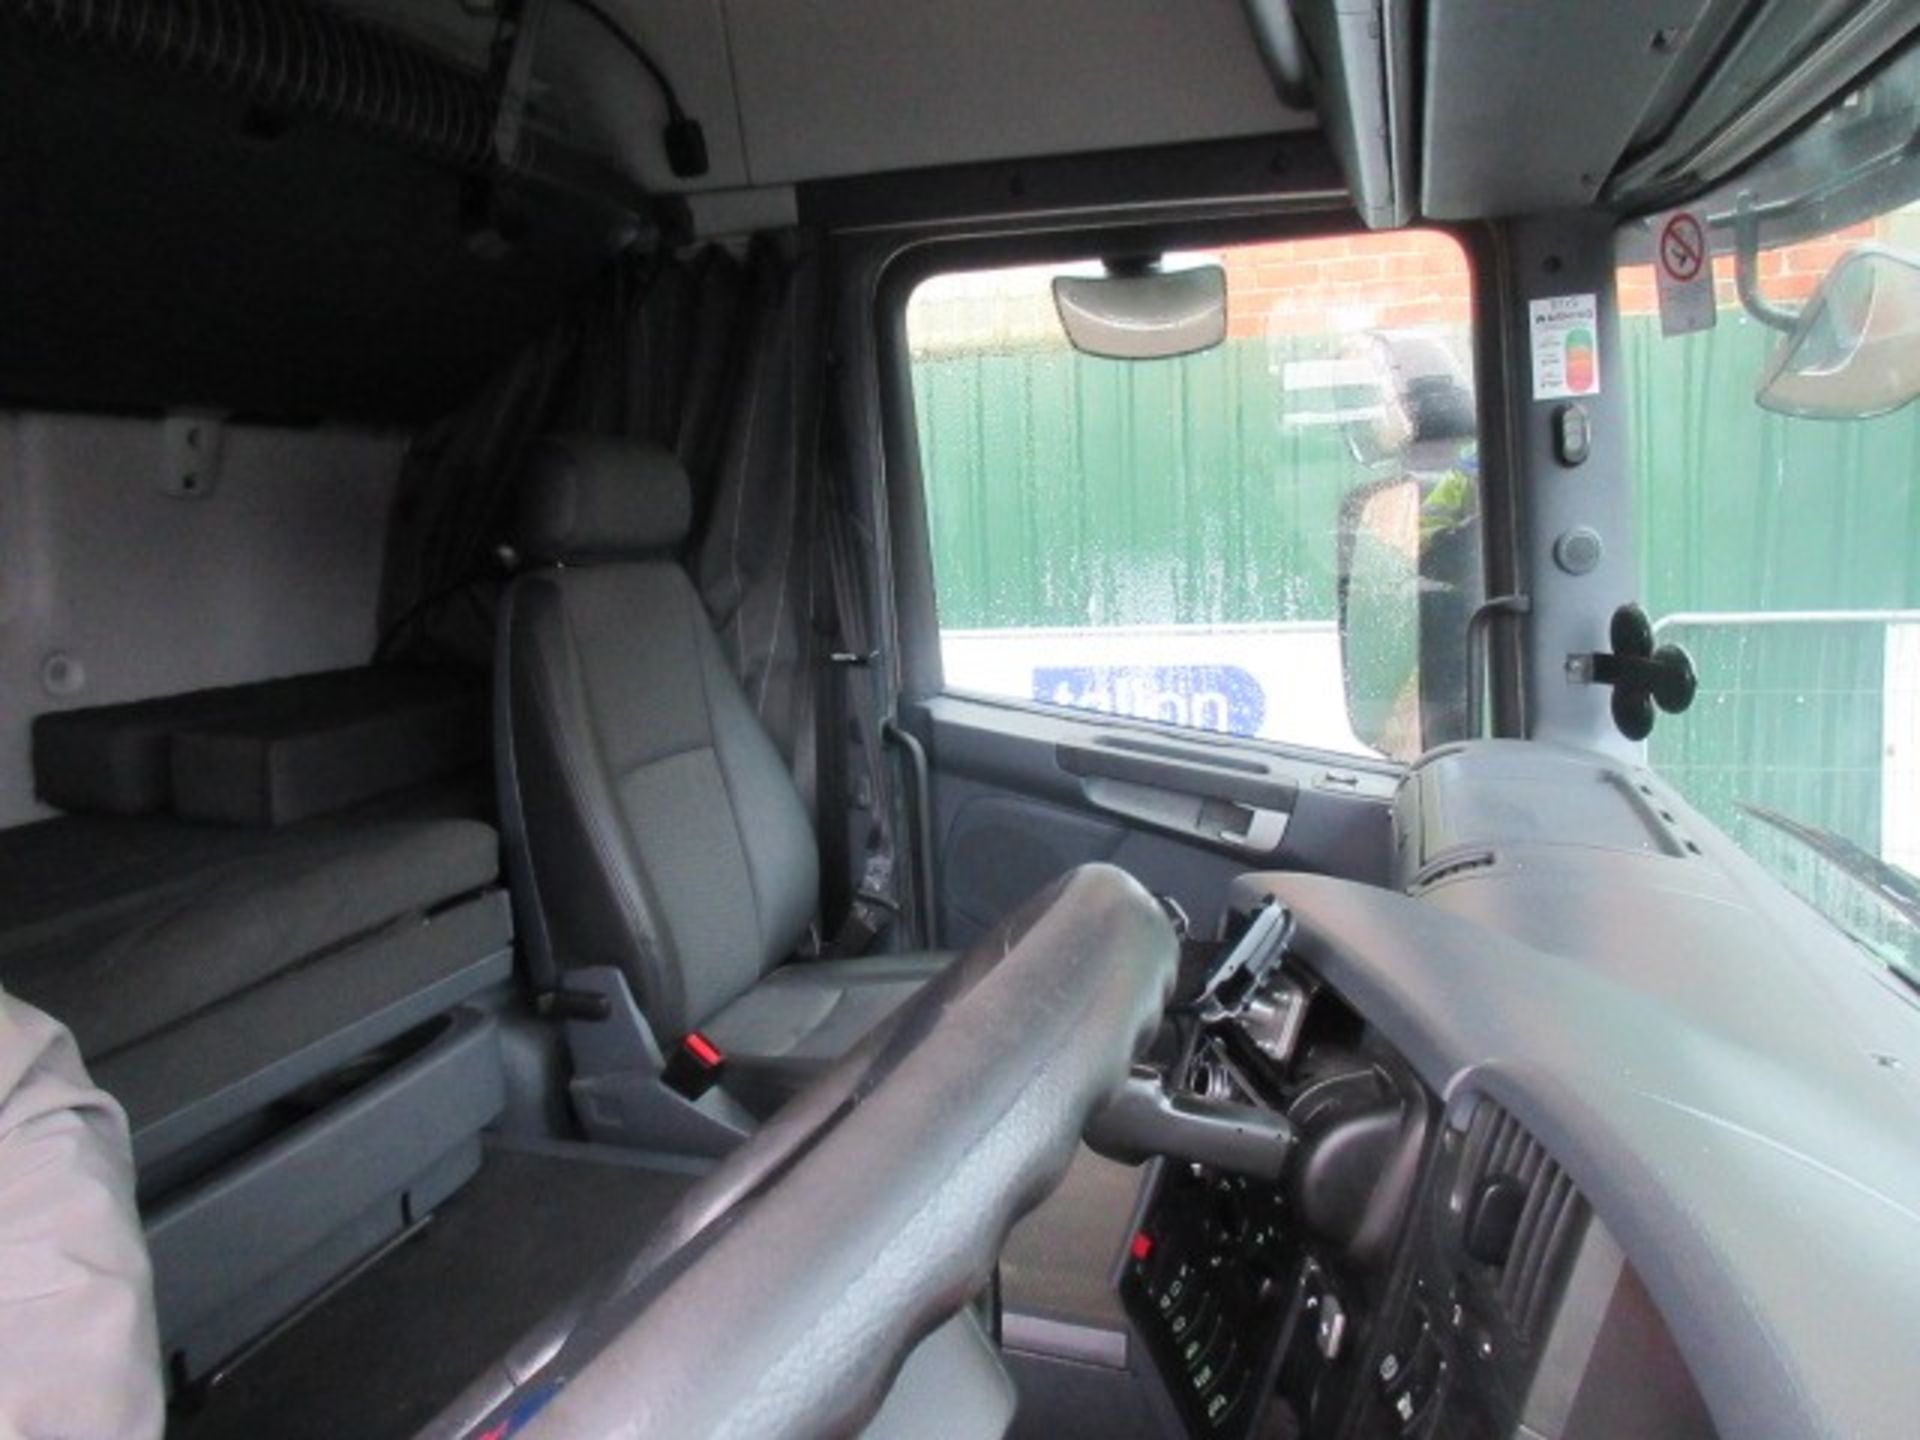 Scania G410 LA6x2/2MNA tractor unit, 2014, '64' PK64 YCL - LOCATED IN WIGAN - Image 7 of 10